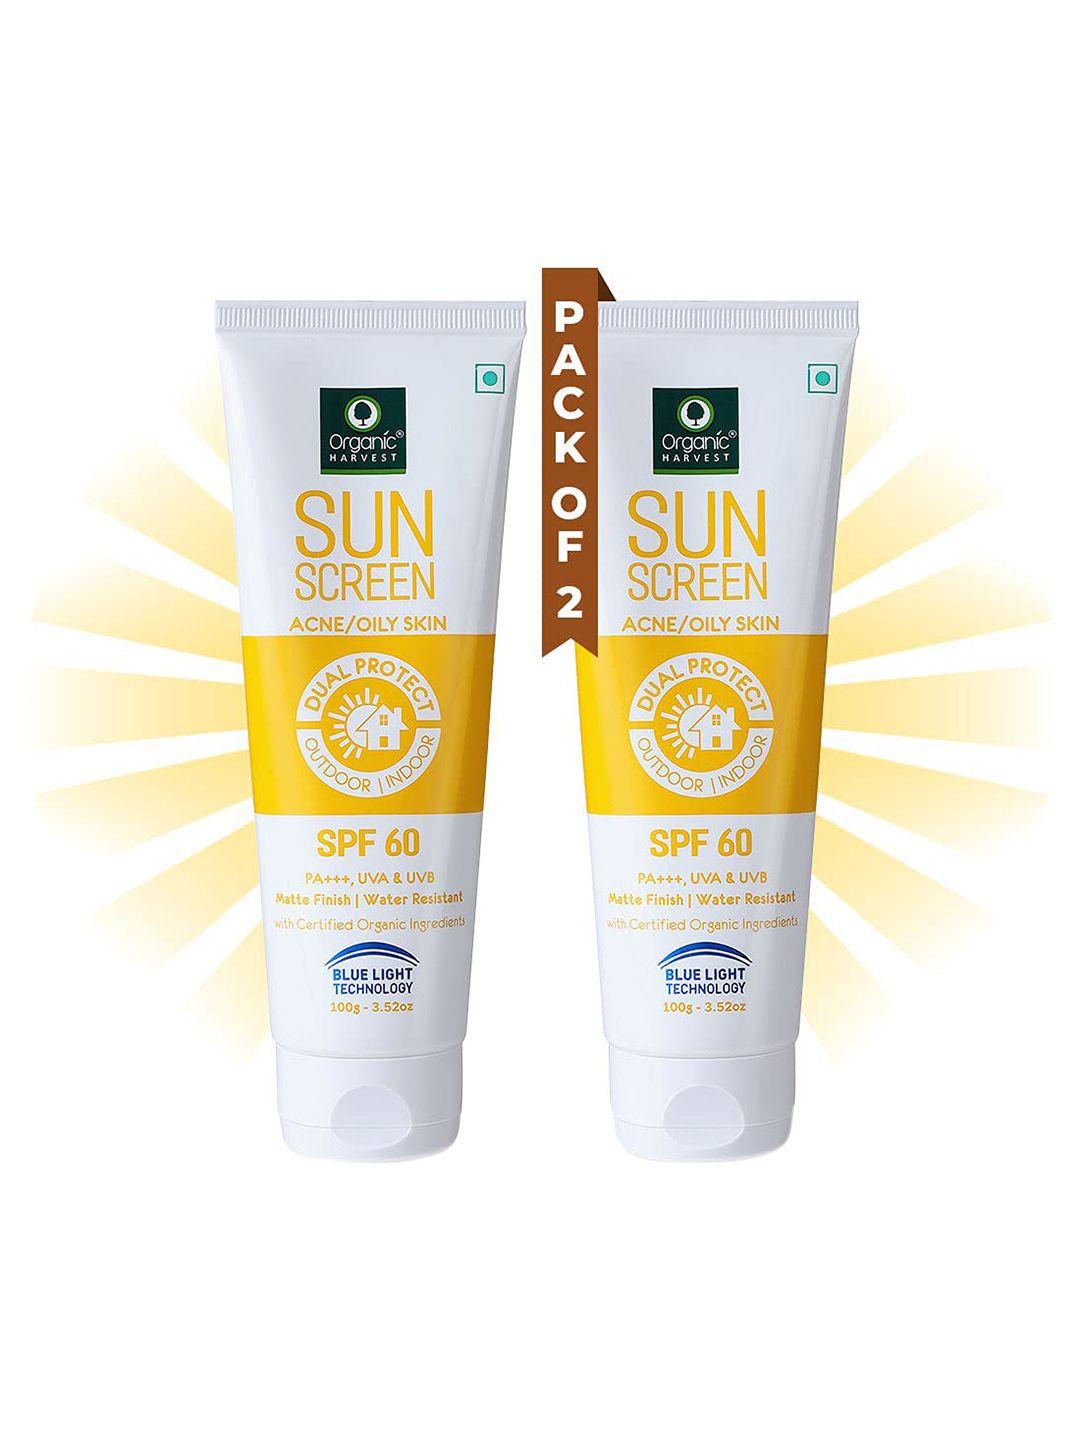 Organic Harvest Set of 2 Dual Protect Sunscreen for Oily & Acne Skin - 100 g Each